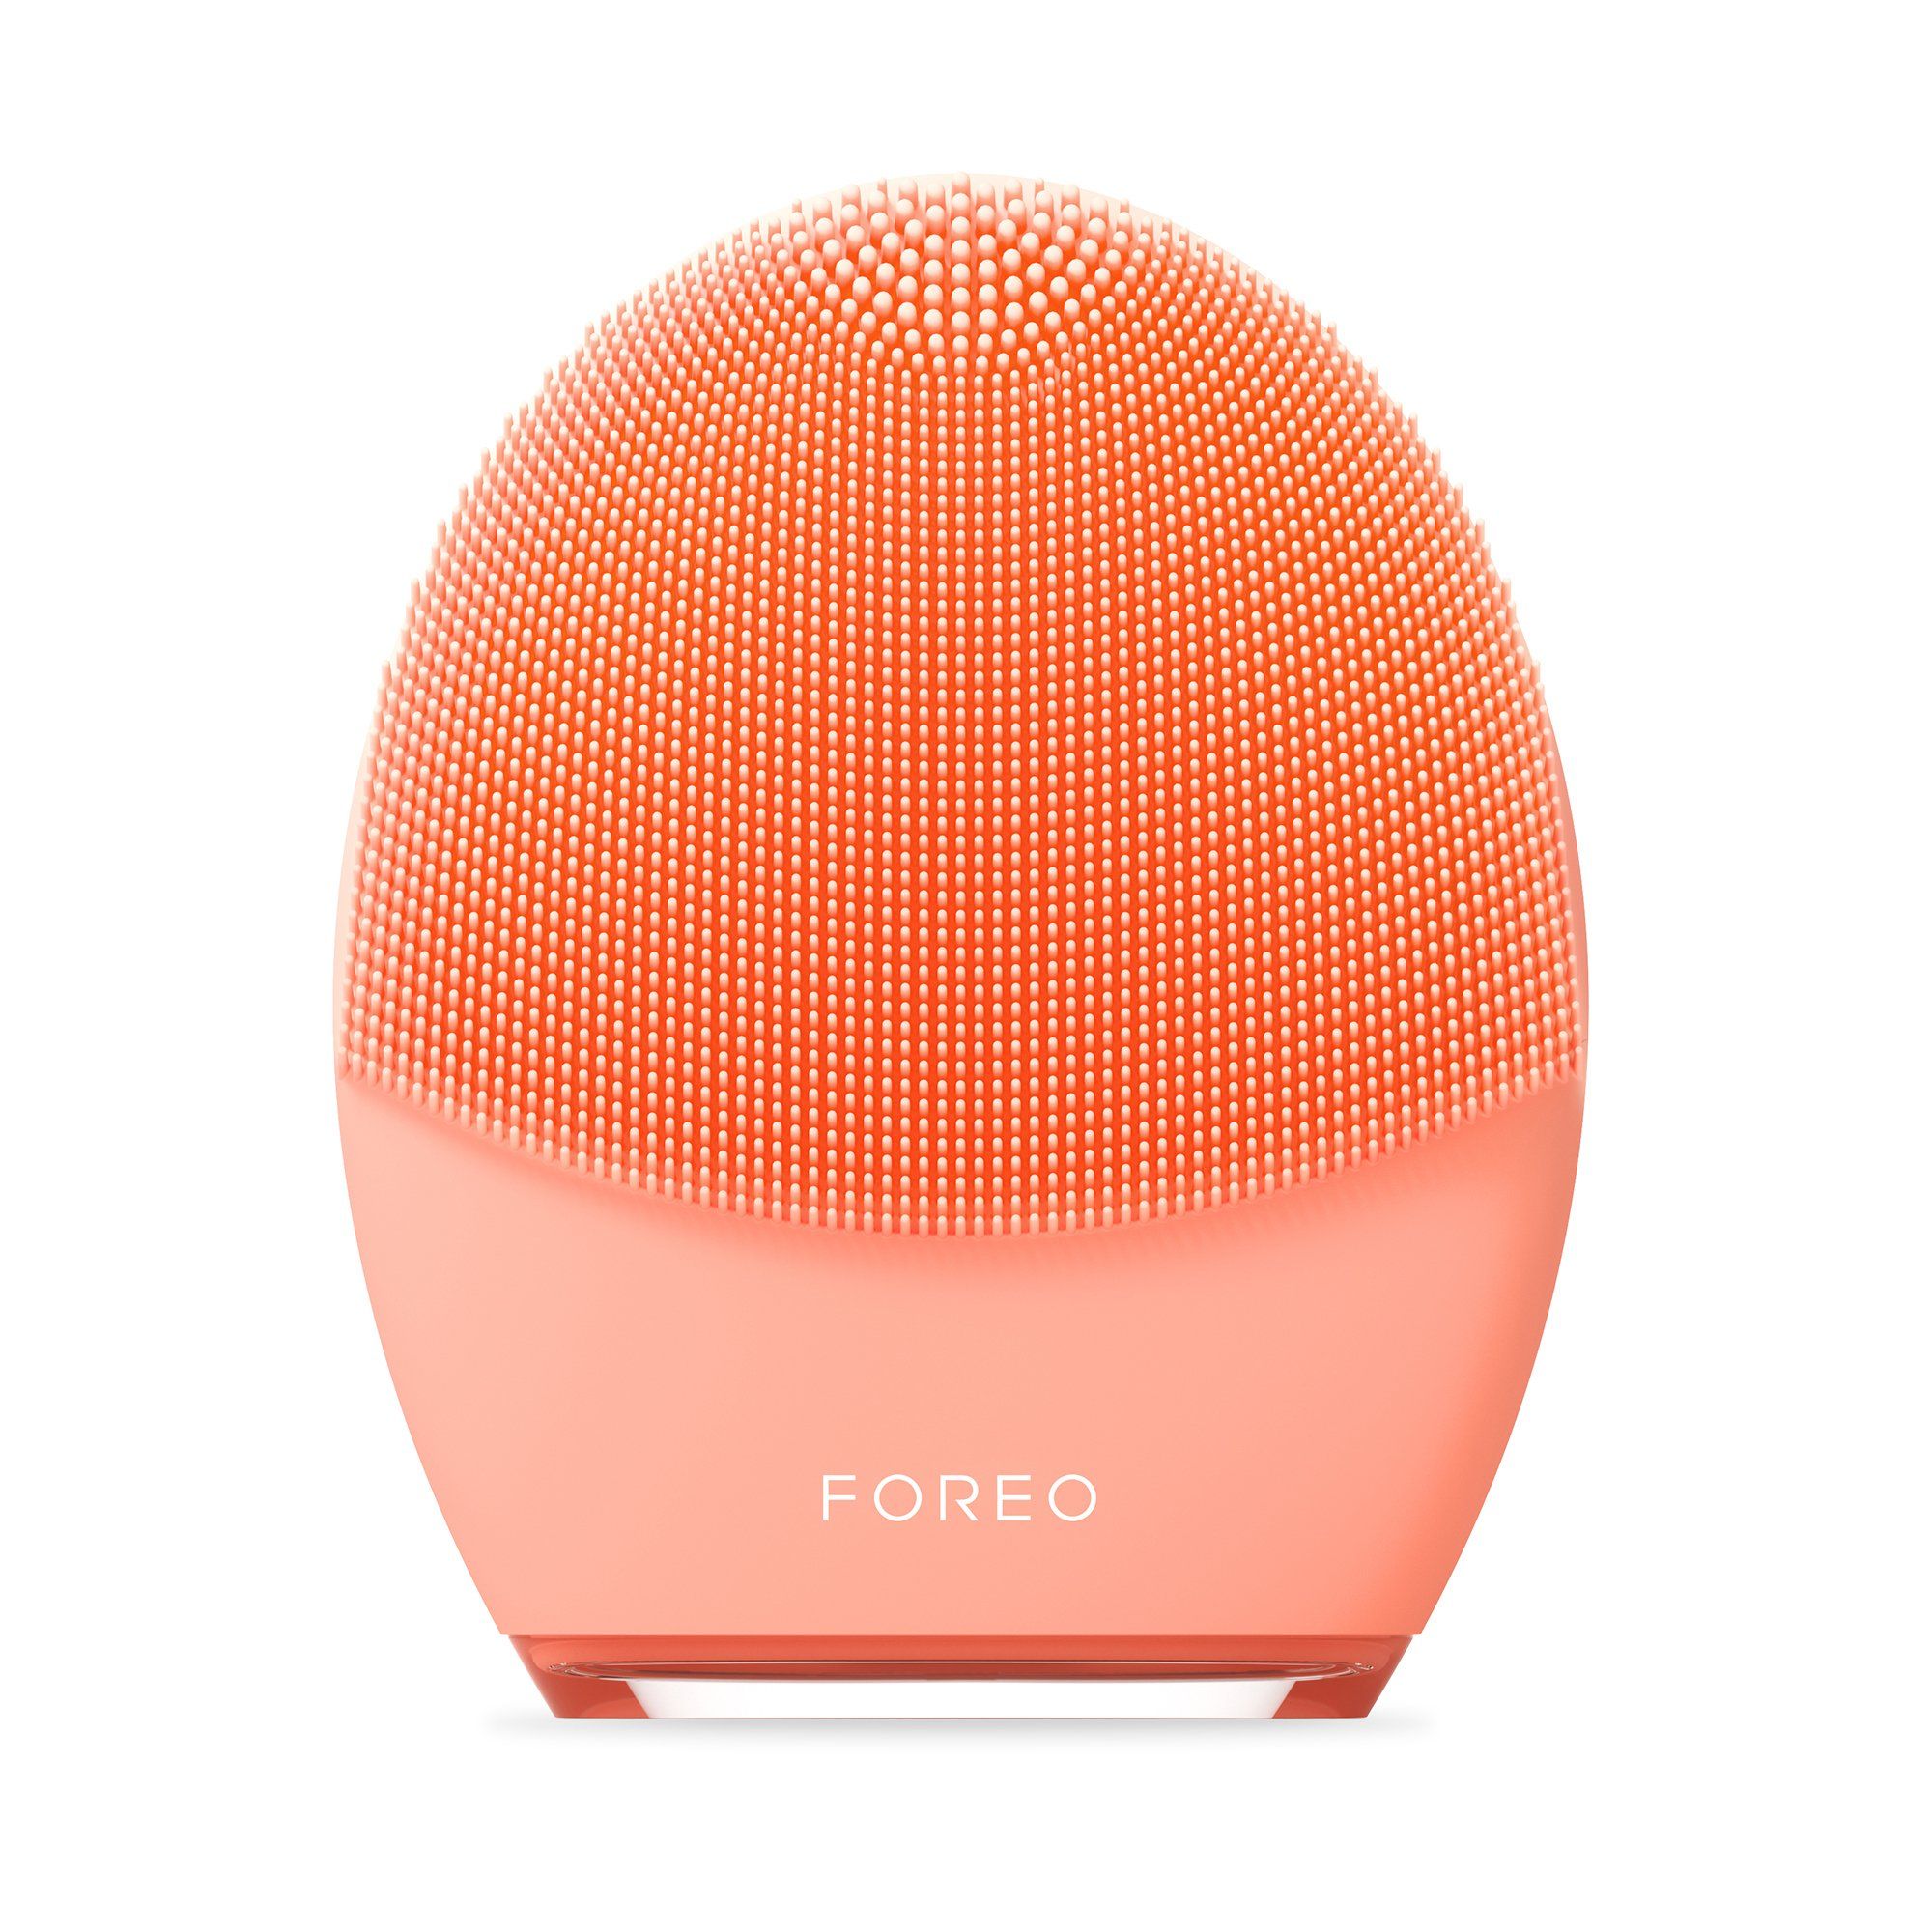 FOREO LUNA™ 4 2-in-1 Smart Facial Cleansing & Firming Device - Balanced Skin